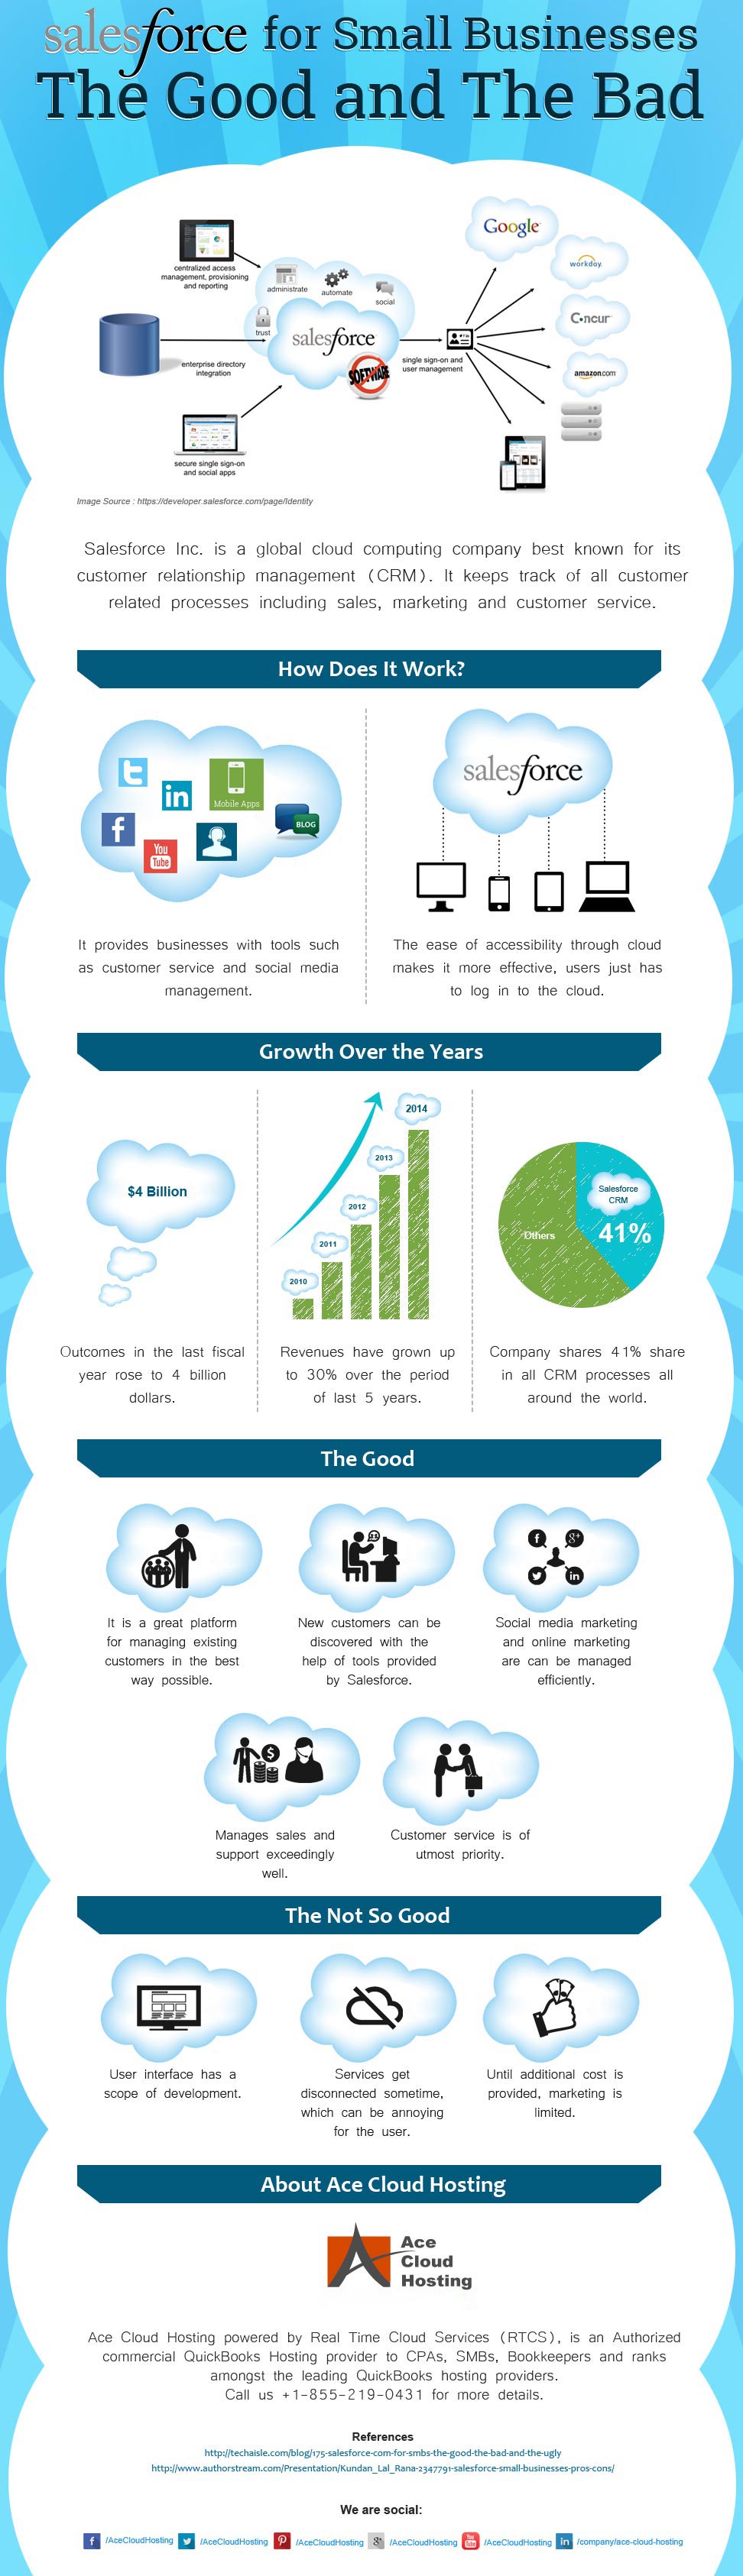 Salesforce for Small Businesses The Good and The Bad Infographic